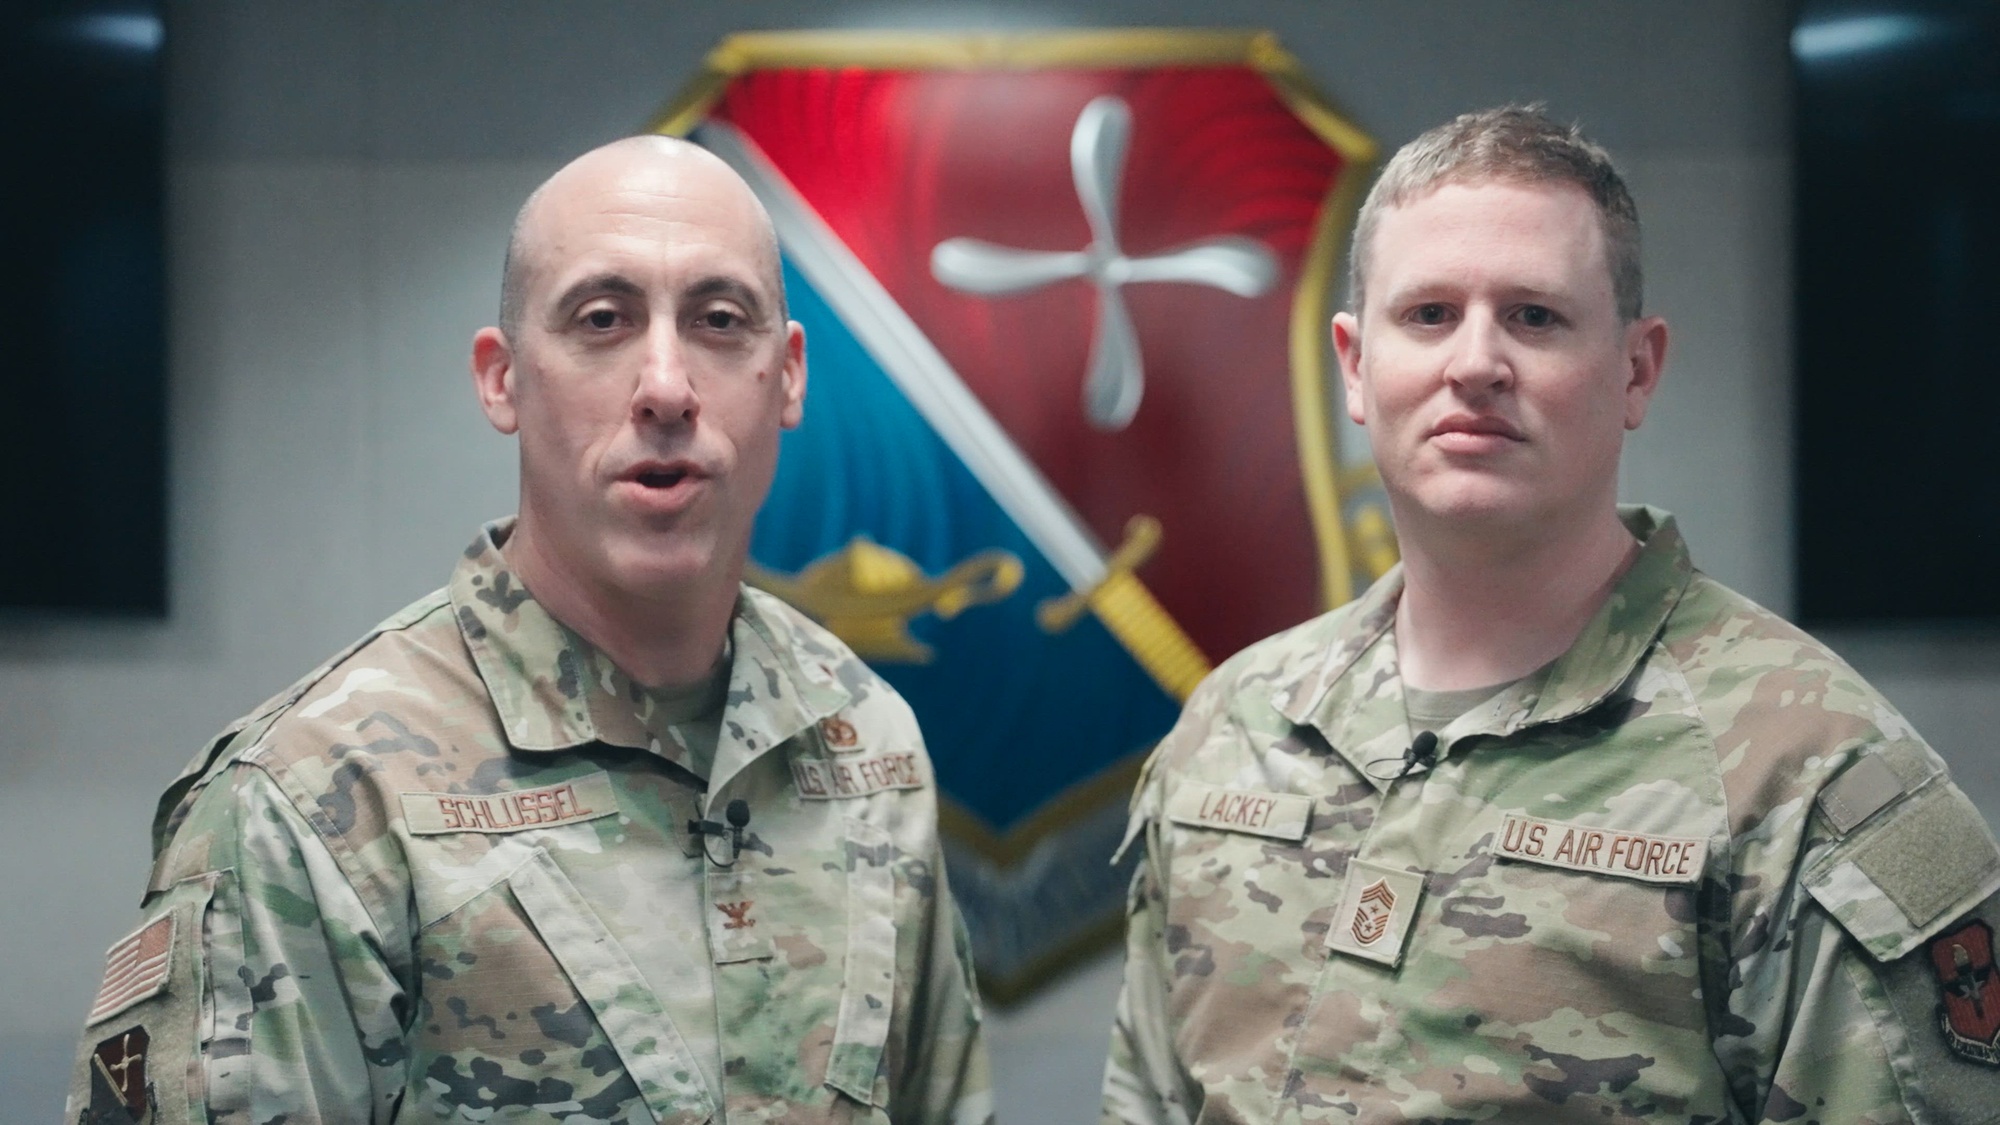 Col. Damian Schlussel and Chief Master Sgt. Joshua Lackey, the Thomas N. Barnes Center for Enlisted Education's command team, talks about the opportunity for enlisted personnel in the Enlisted Airmanship Continuum and Foundation Courses 300, 500, and 700. 